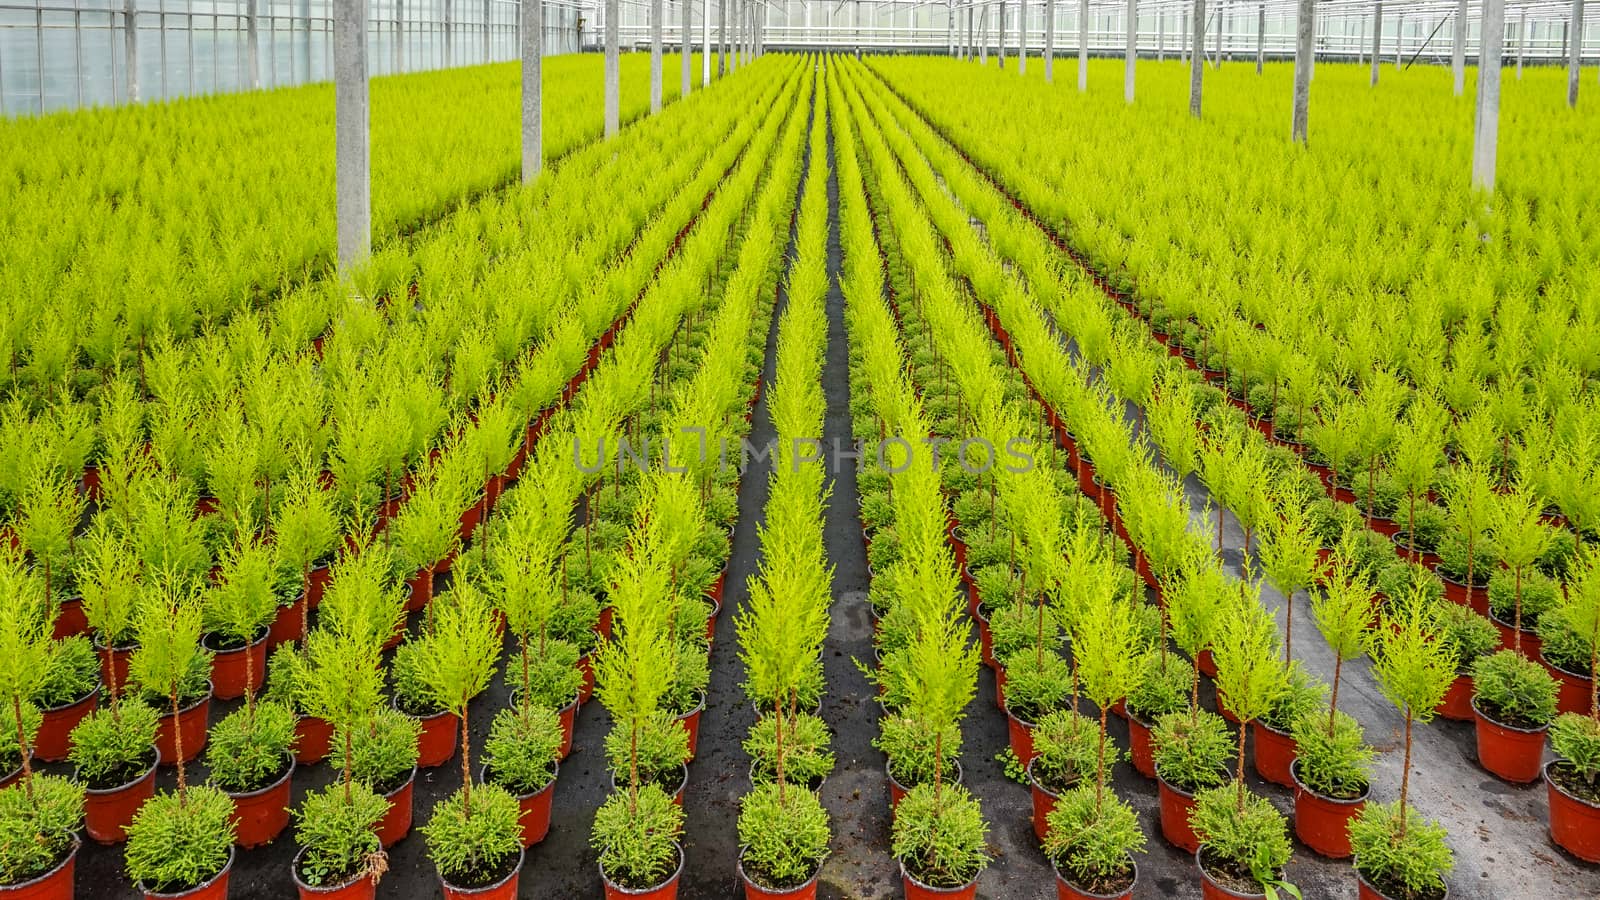 Thousands of small Cupresses trees lined up in a greenhouse